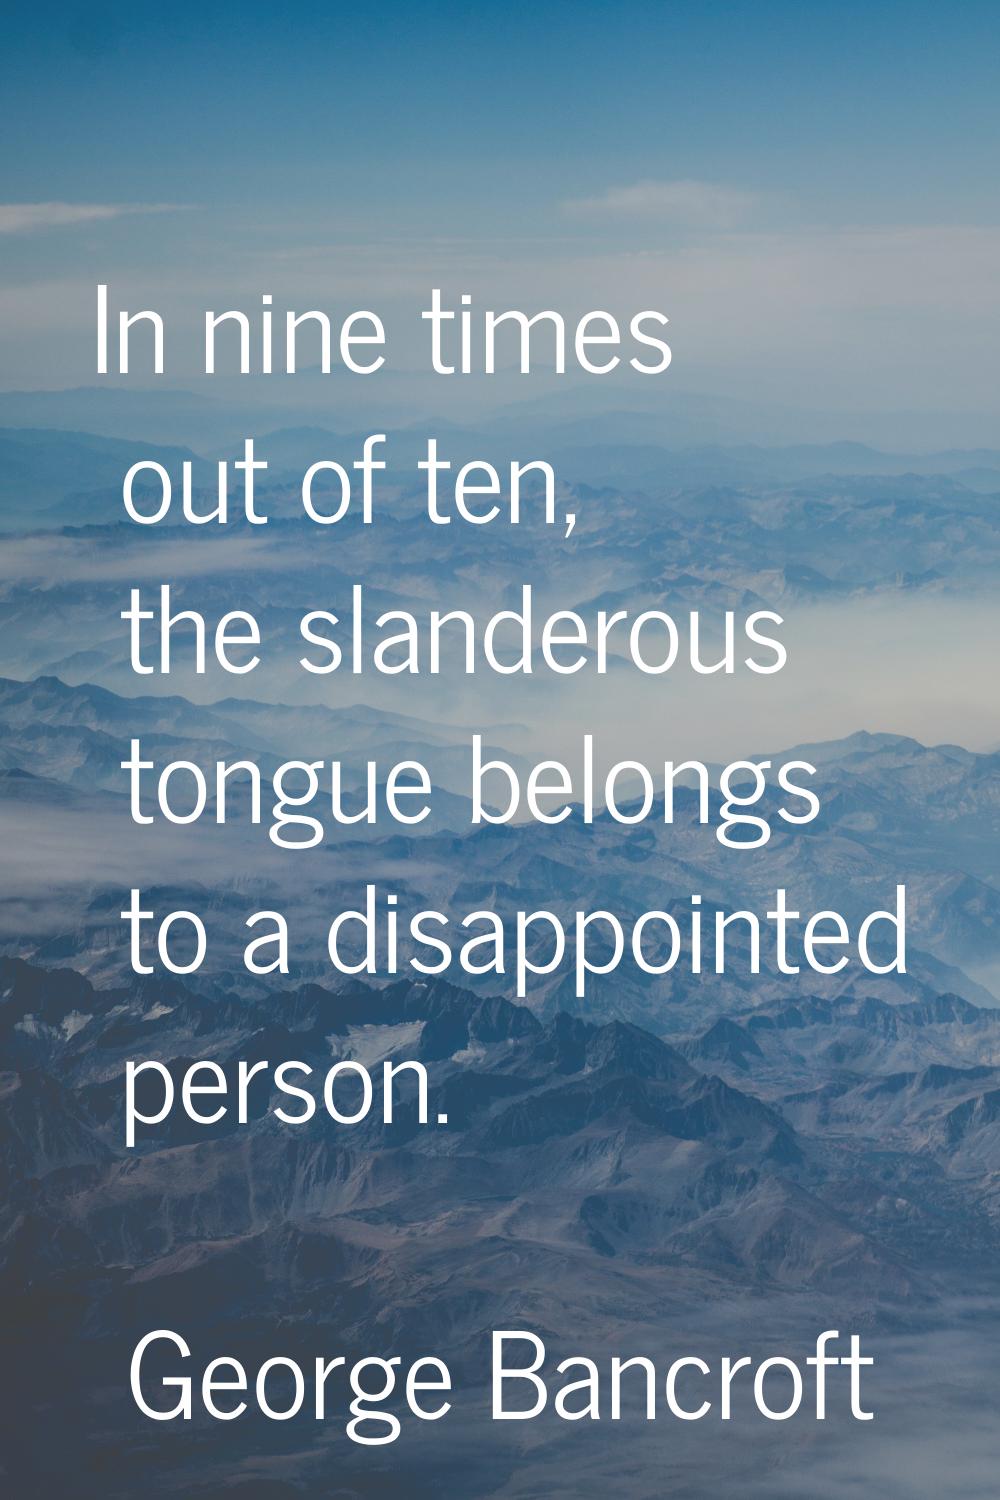 In nine times out of ten, the slanderous tongue belongs to a disappointed person.